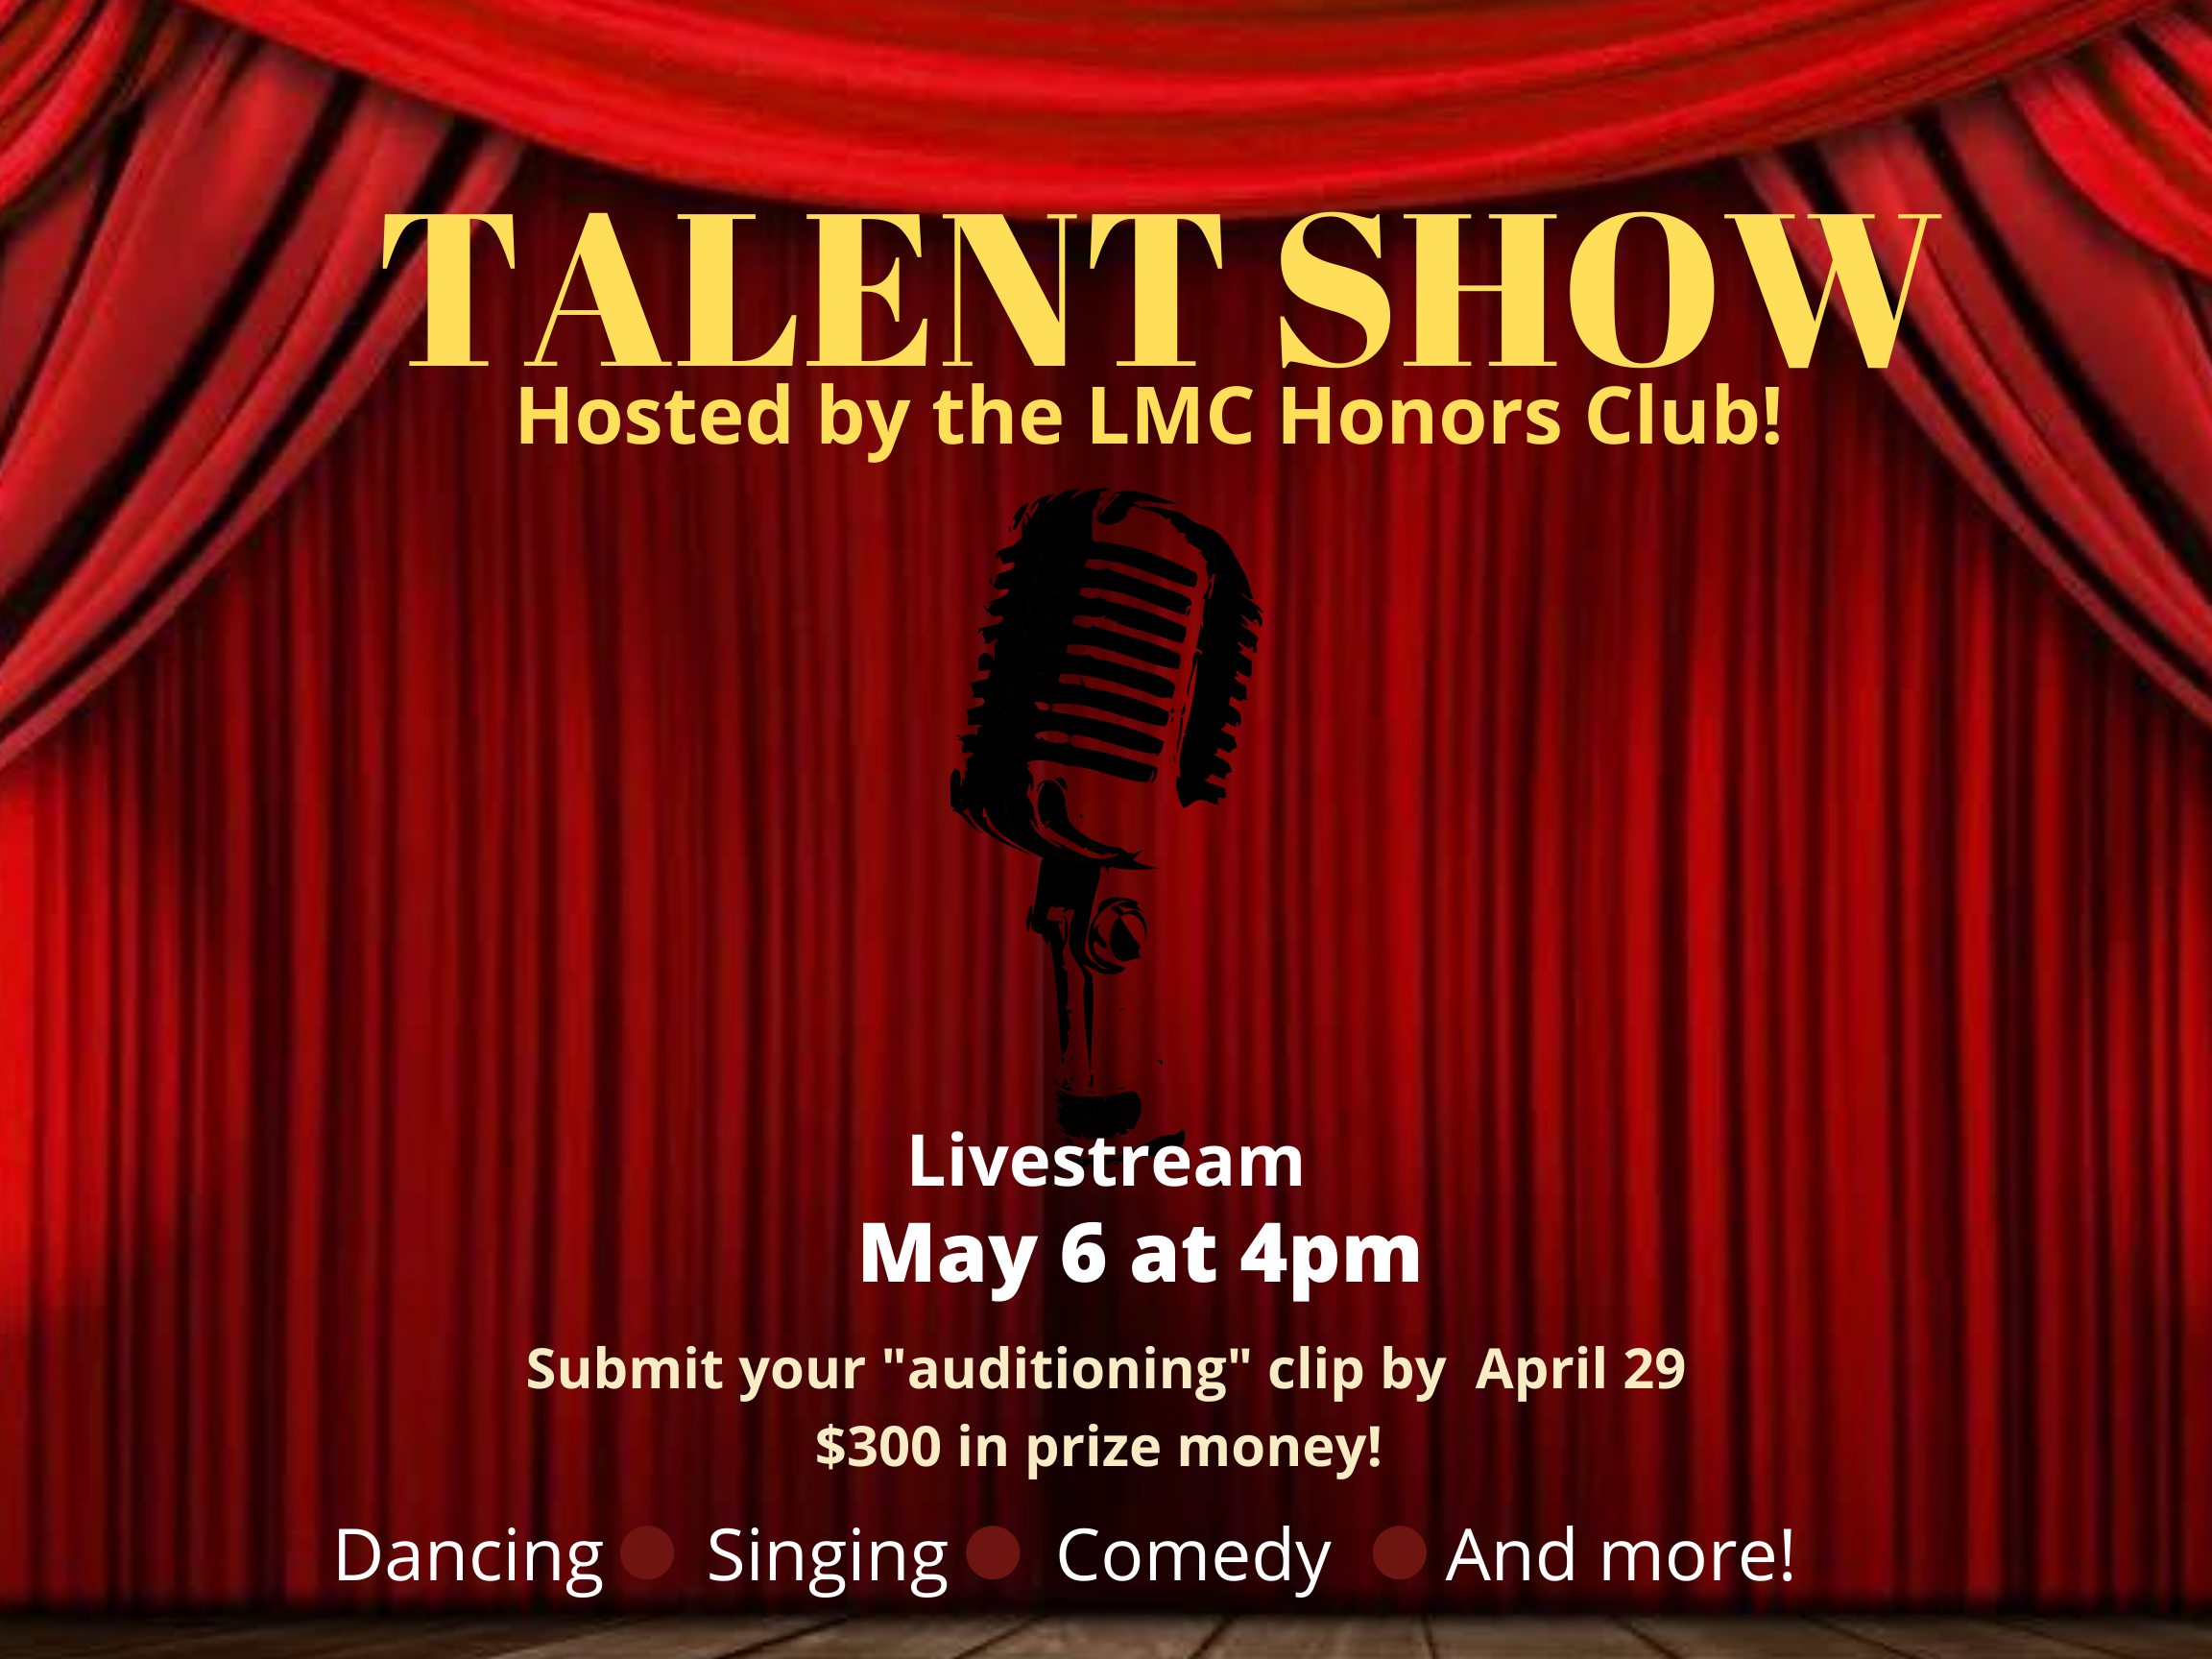 Talent show 2022 May 6th